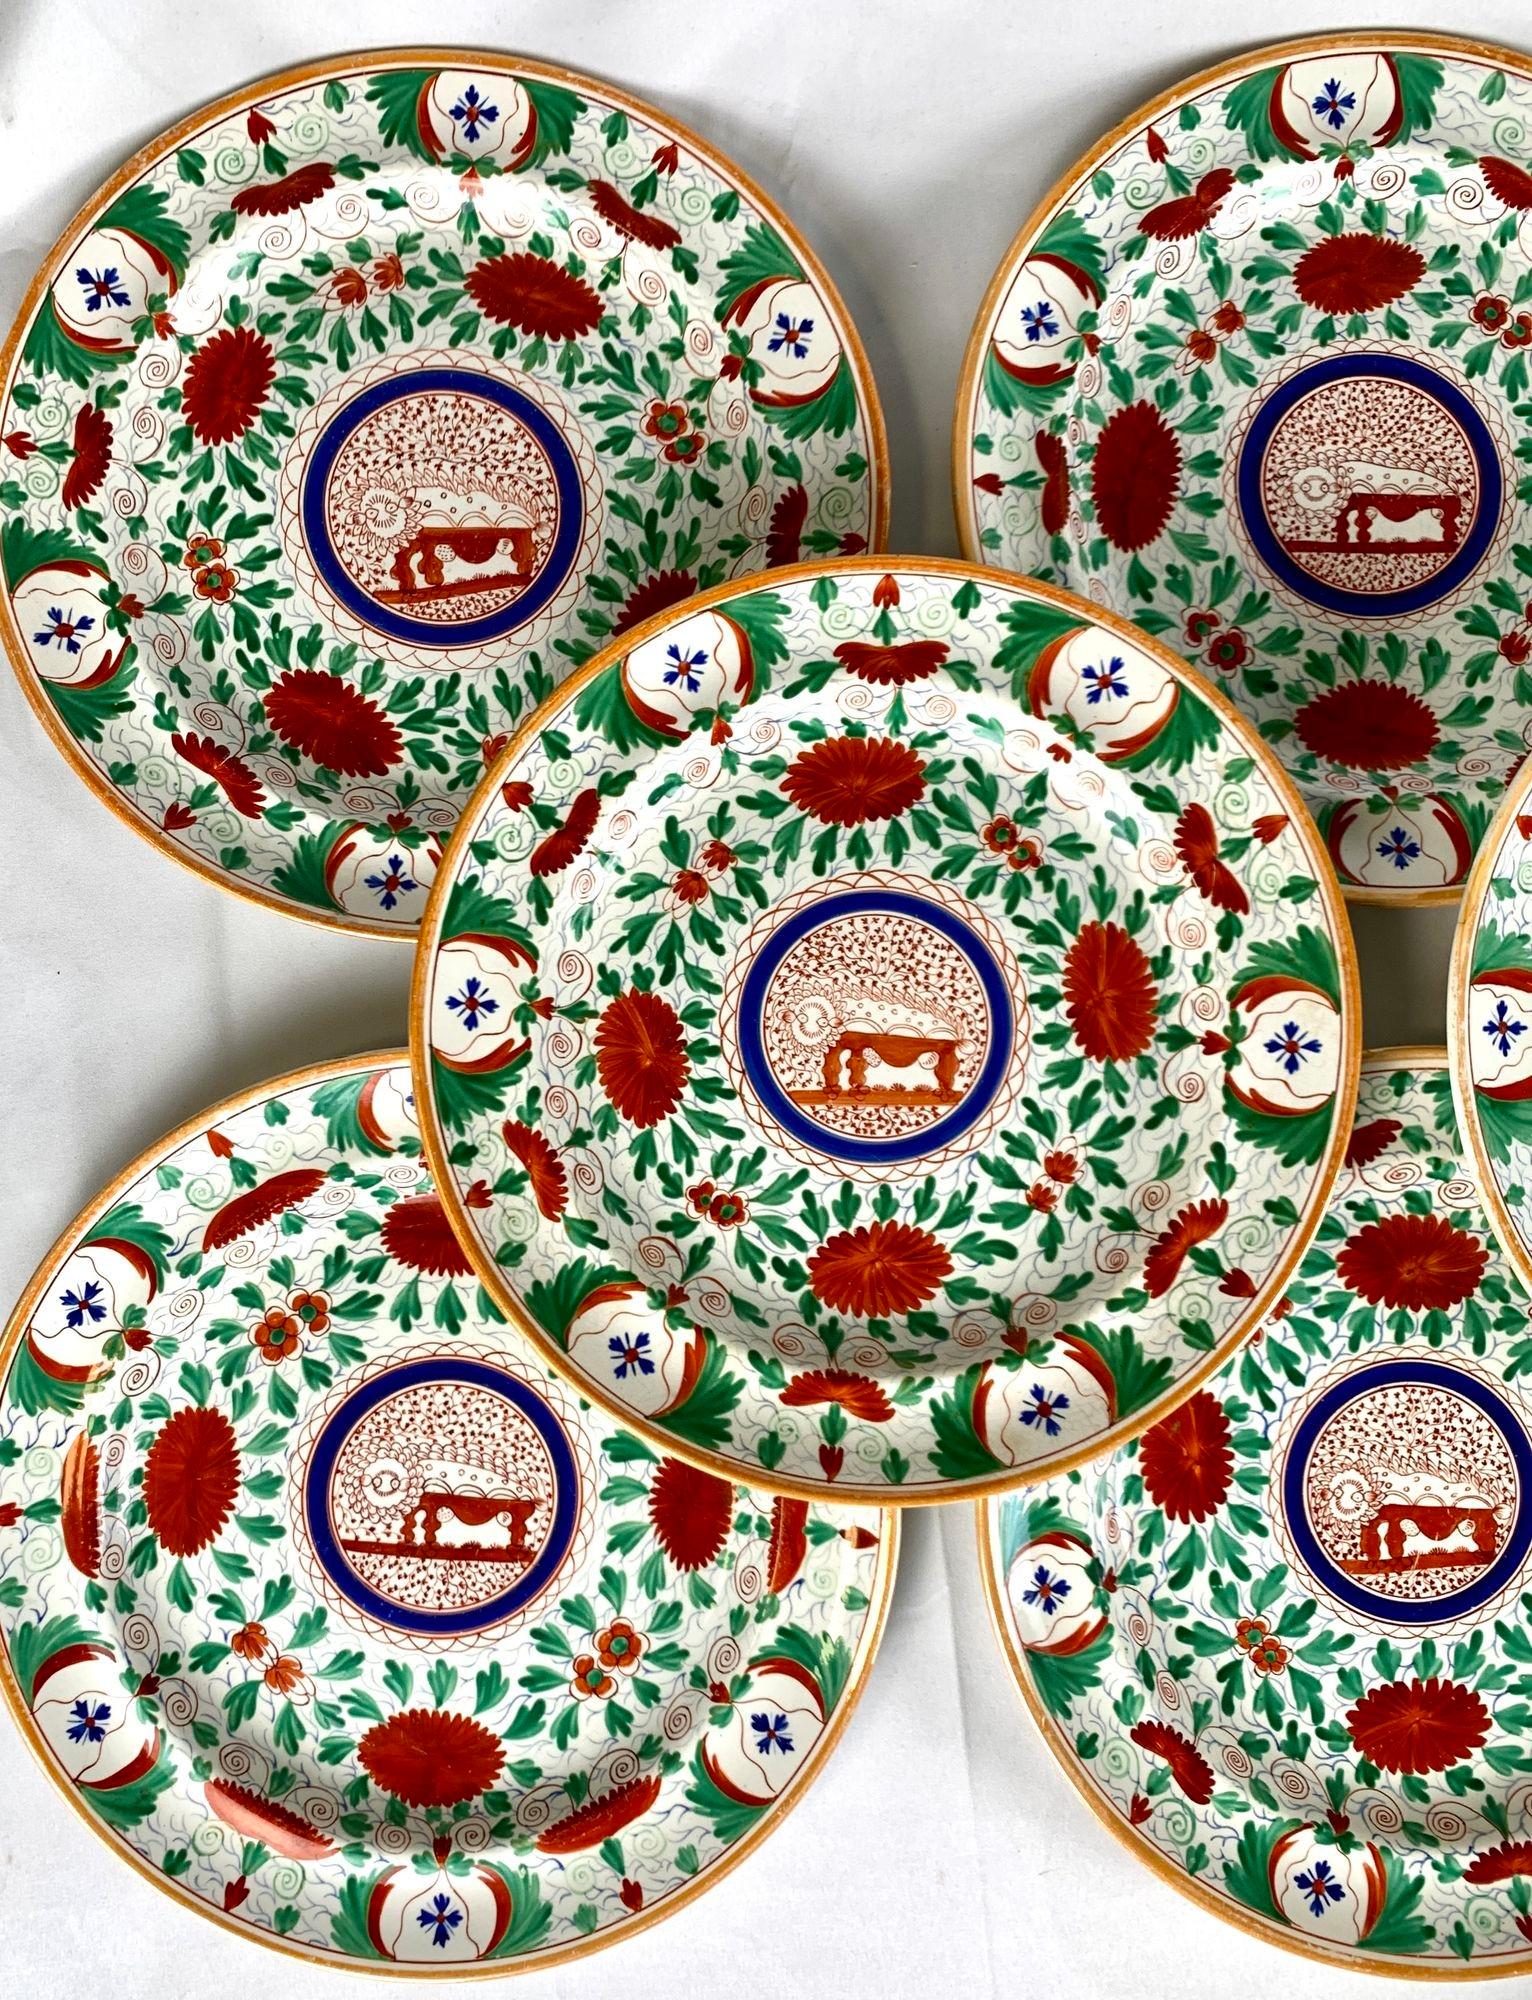 19th Century Eleven Crazy Cow Dinner Plates Hand Painted by Minton England Circa 1820